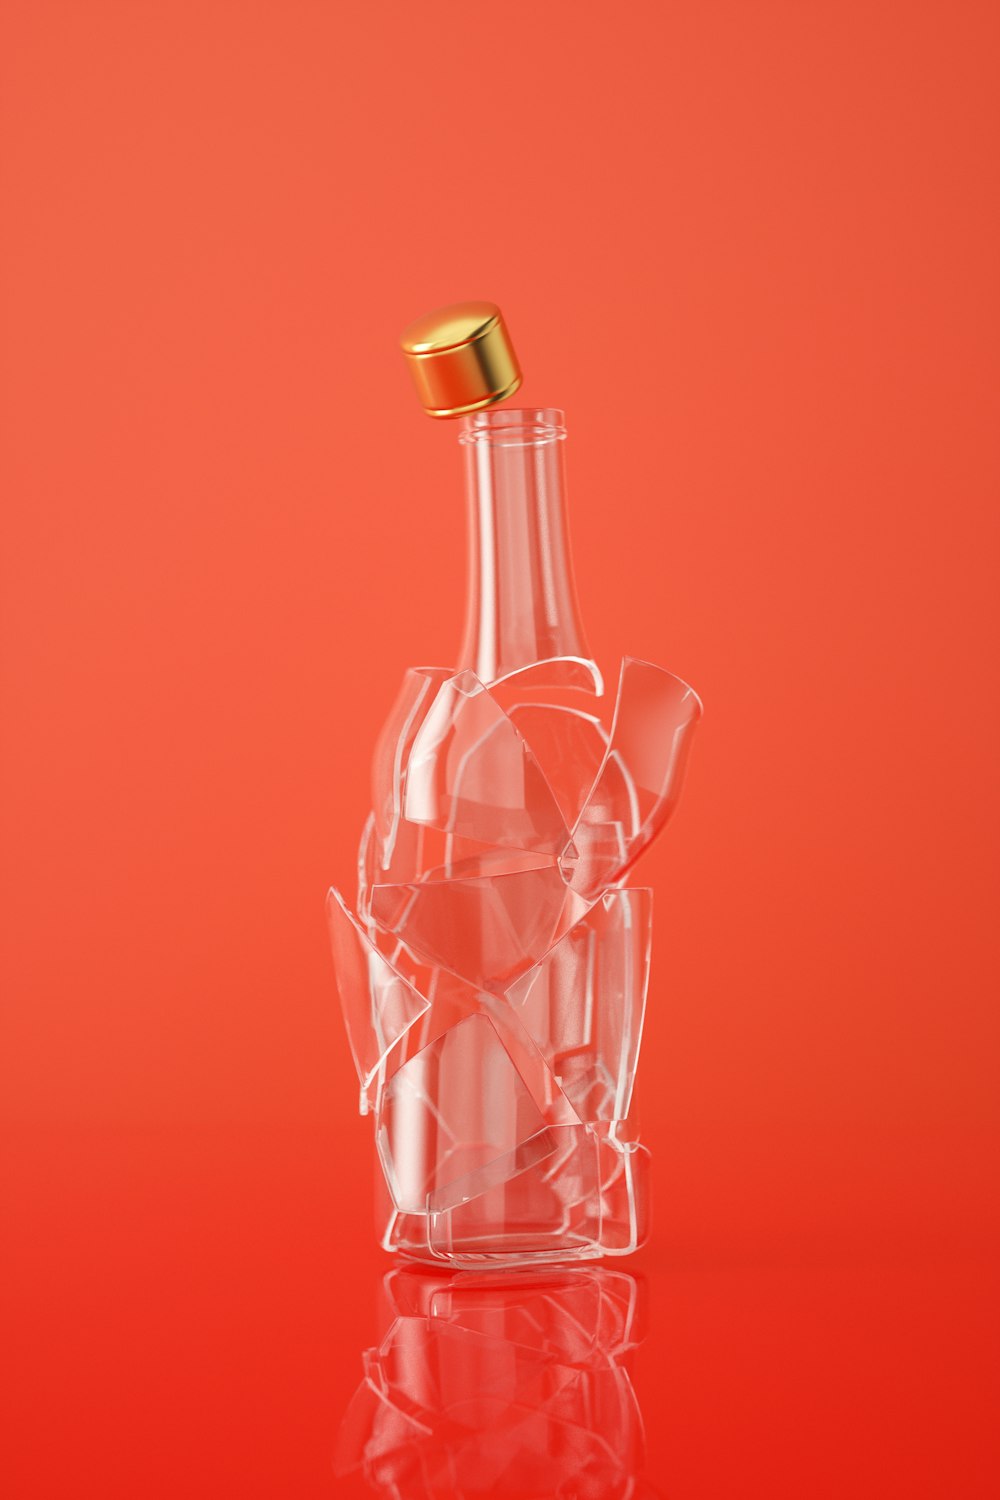 a glass bottle with a gold cap on a red background